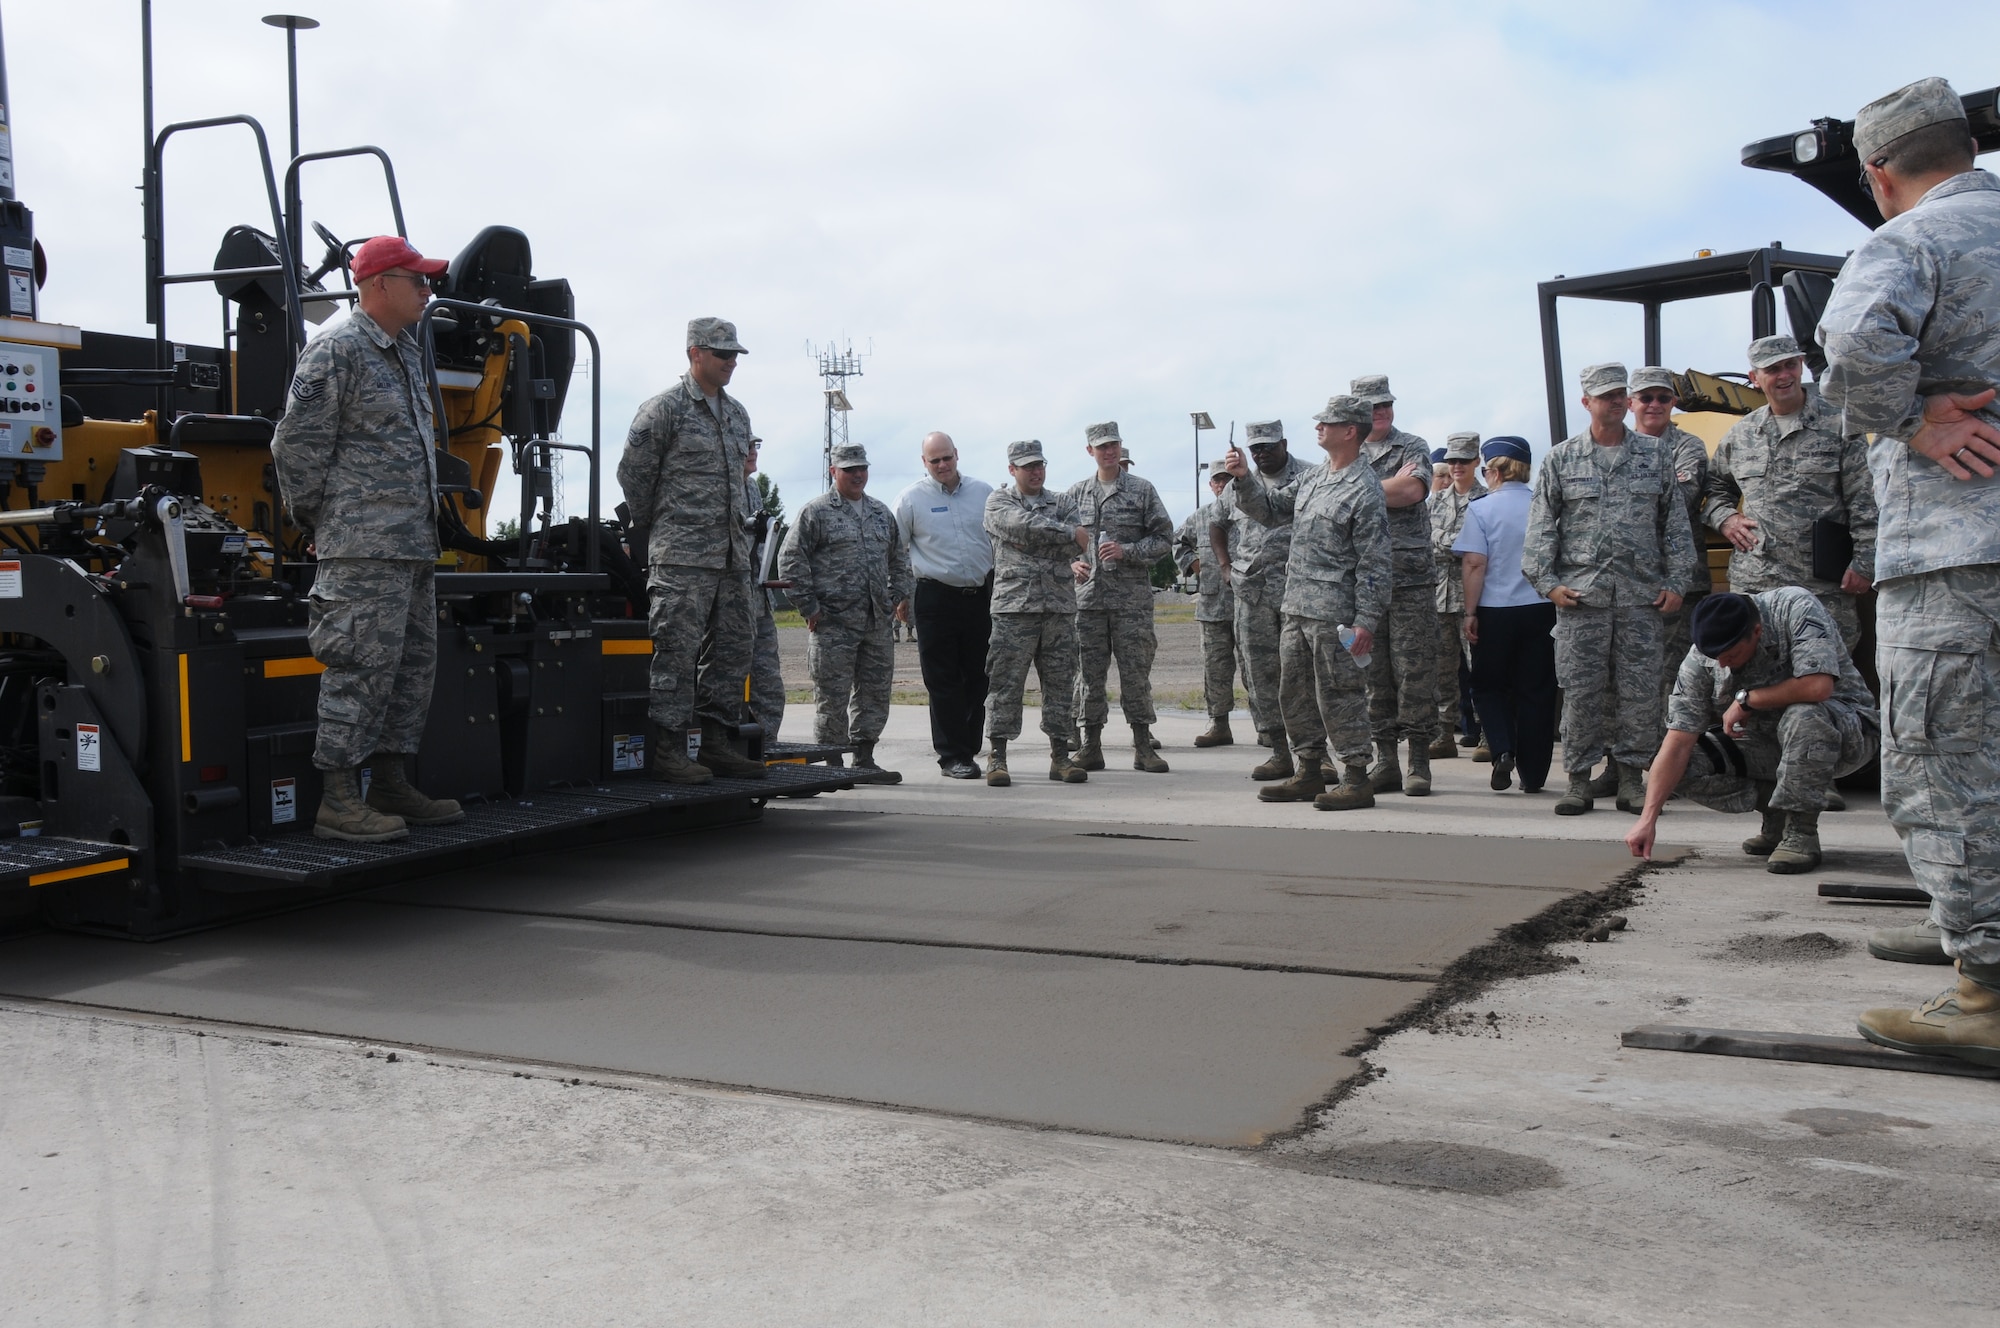 Tech Sergeant Samuel Miller and Staff Sergeant Alcides Silva show members of the 188th Wing the capabilities of the Zimmerman mobile concrete mixing trailer at Ebbing Air National Guard Base, Fort Smith, Arkansas. Silva was driving the mobile concrete mixing trailer to showcase its capabilities during a tour of the 188th Civil Engineering Squadron Rapid Engineer Deployable Heavy Operational Repair Squadron Engineer (REDHORSE) Training Center. The 188th has the Air National Guard's first and only REDHORSE training center. (U.S. Air National Guard photo by Airman 1st Class Cody Martin/released)